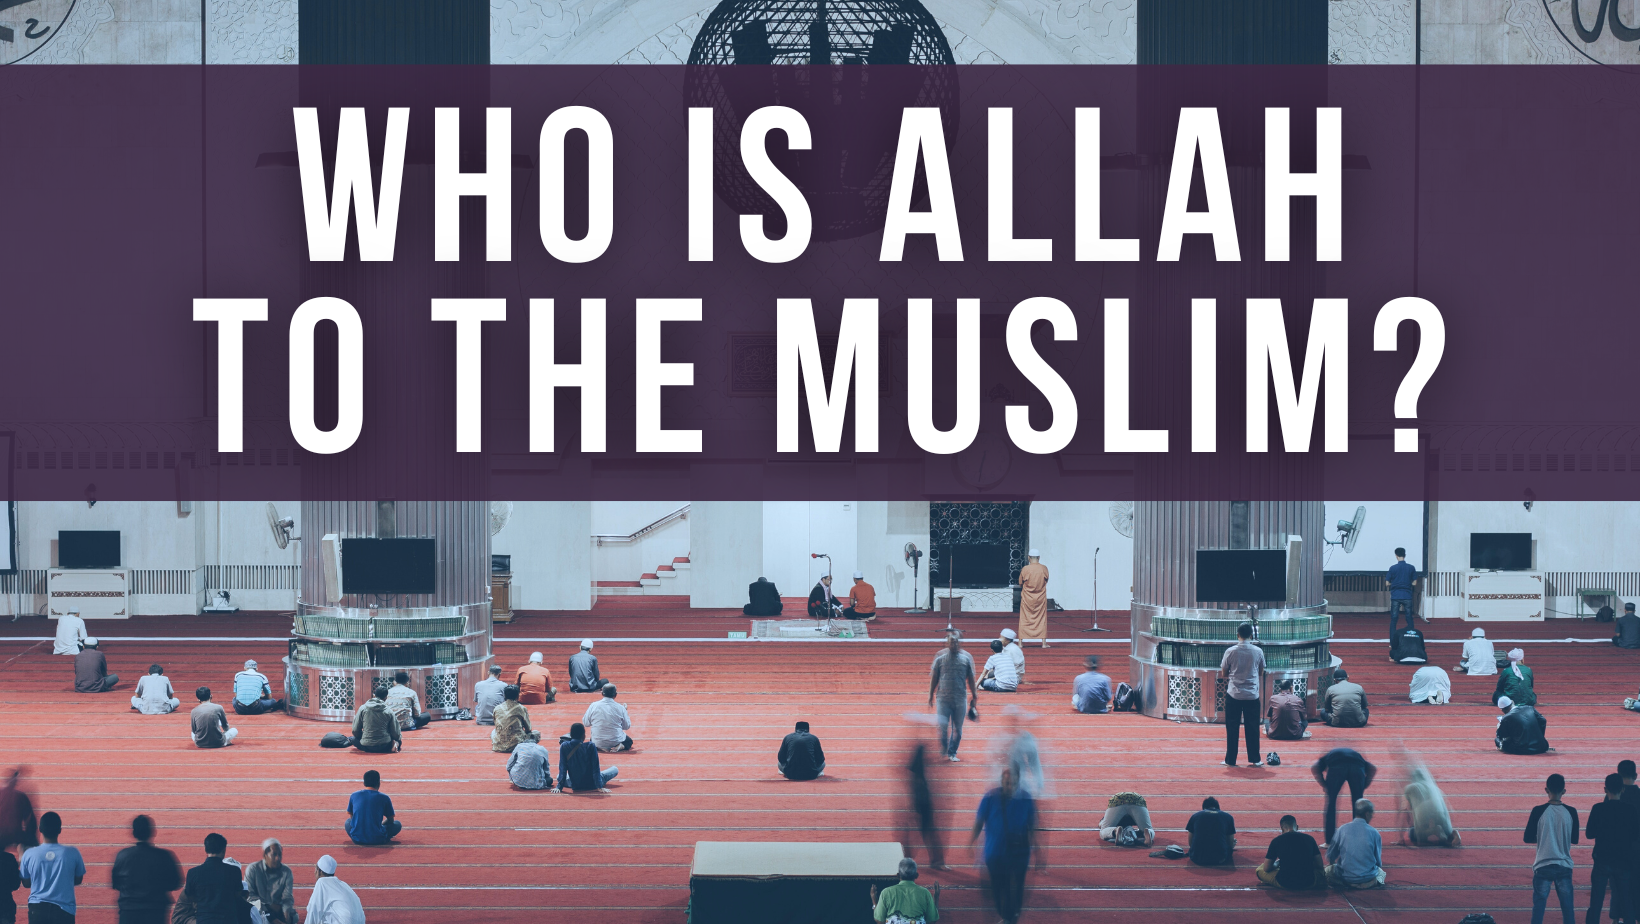 Who is Allah to the Muslim?